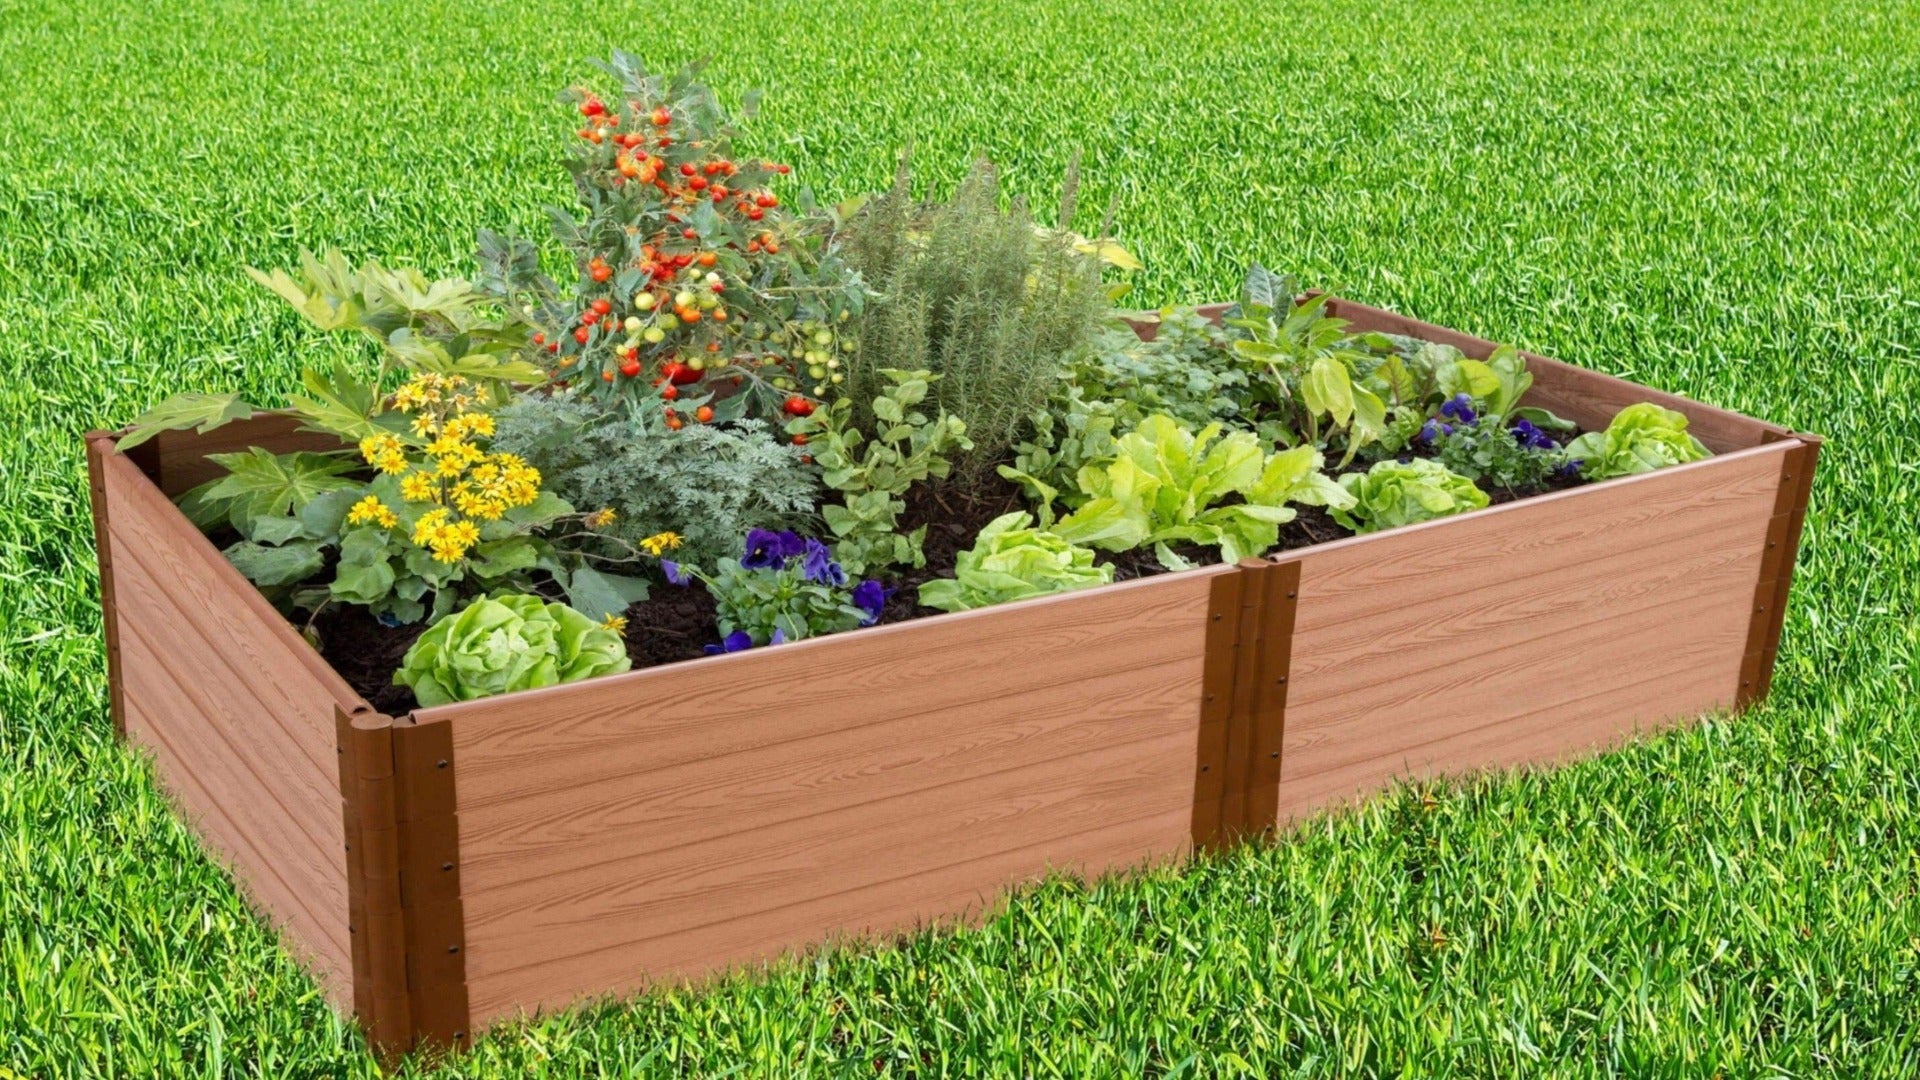 Tool-Free 4' x 8' Raised Garden Bed Raised Garden Beds Frame It All Classic Sienna 1'' 4